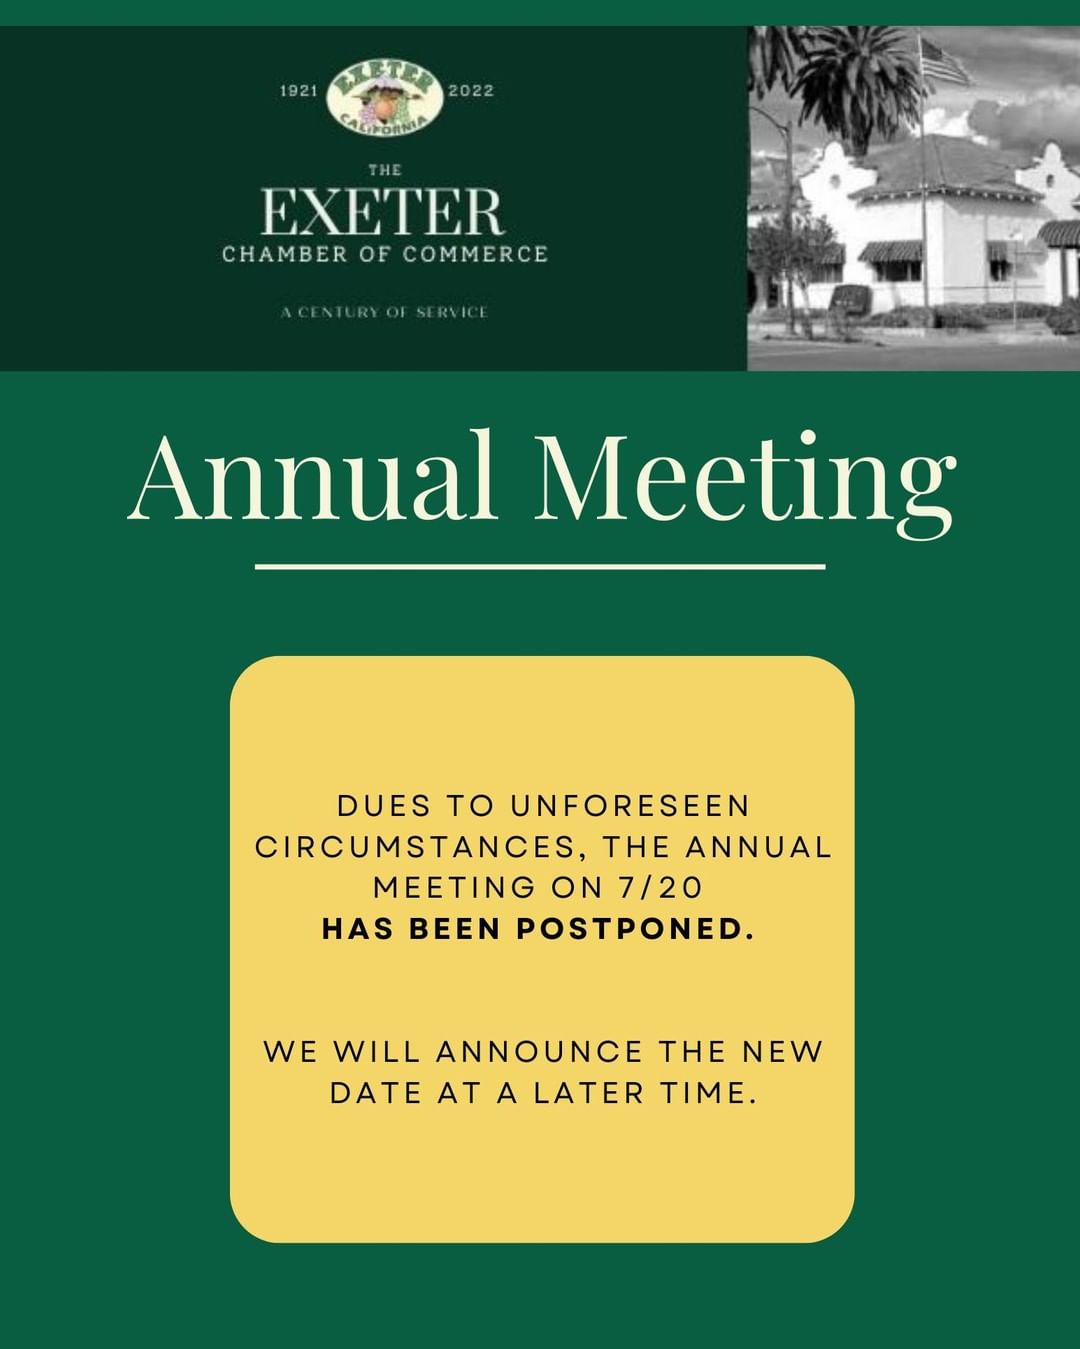 Dues to unforeseen circumstances, the Annual Meeting on 7/20 has been postponed….